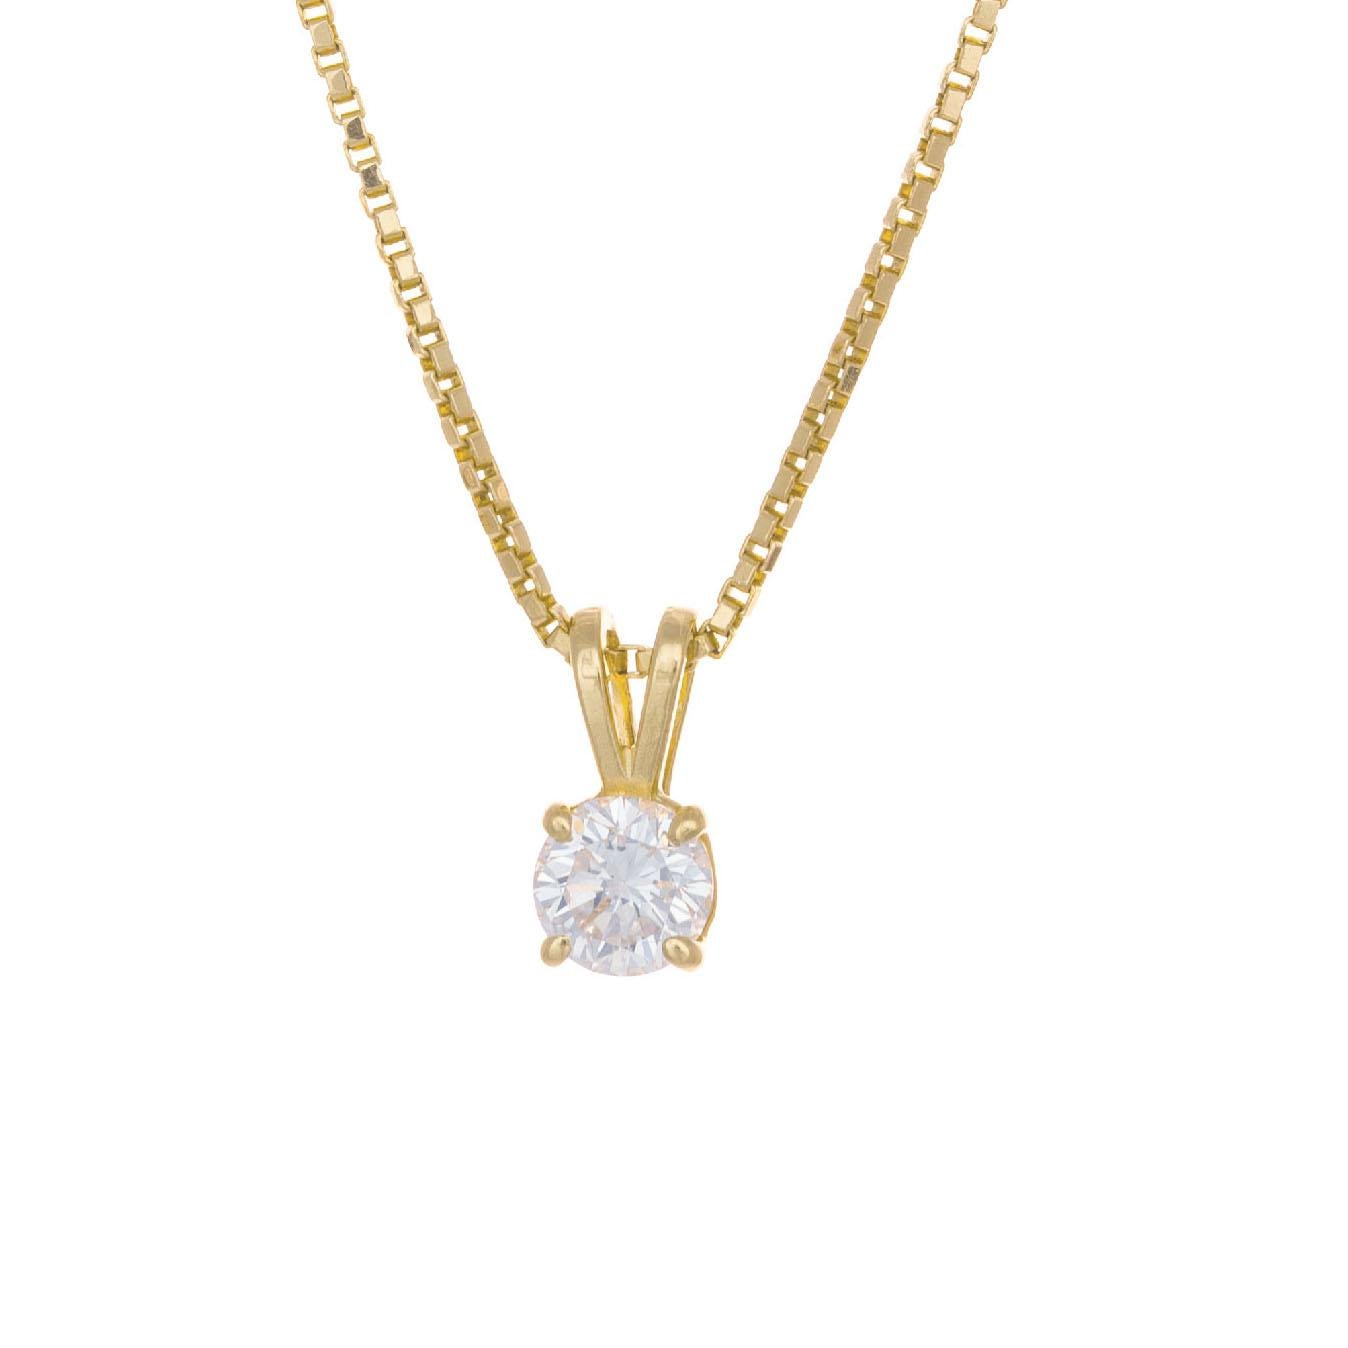 Basket set diamond pendant necklace. Four prong basket with a 14k yellow gold box style 20 inch chain. EGL certified# US 313496101D

1 round diamond approx. total weight: .45cts G-H, SI1  EGL.
Top to bottom: 10.10mm or .40 inches
Width: 9.99mm or